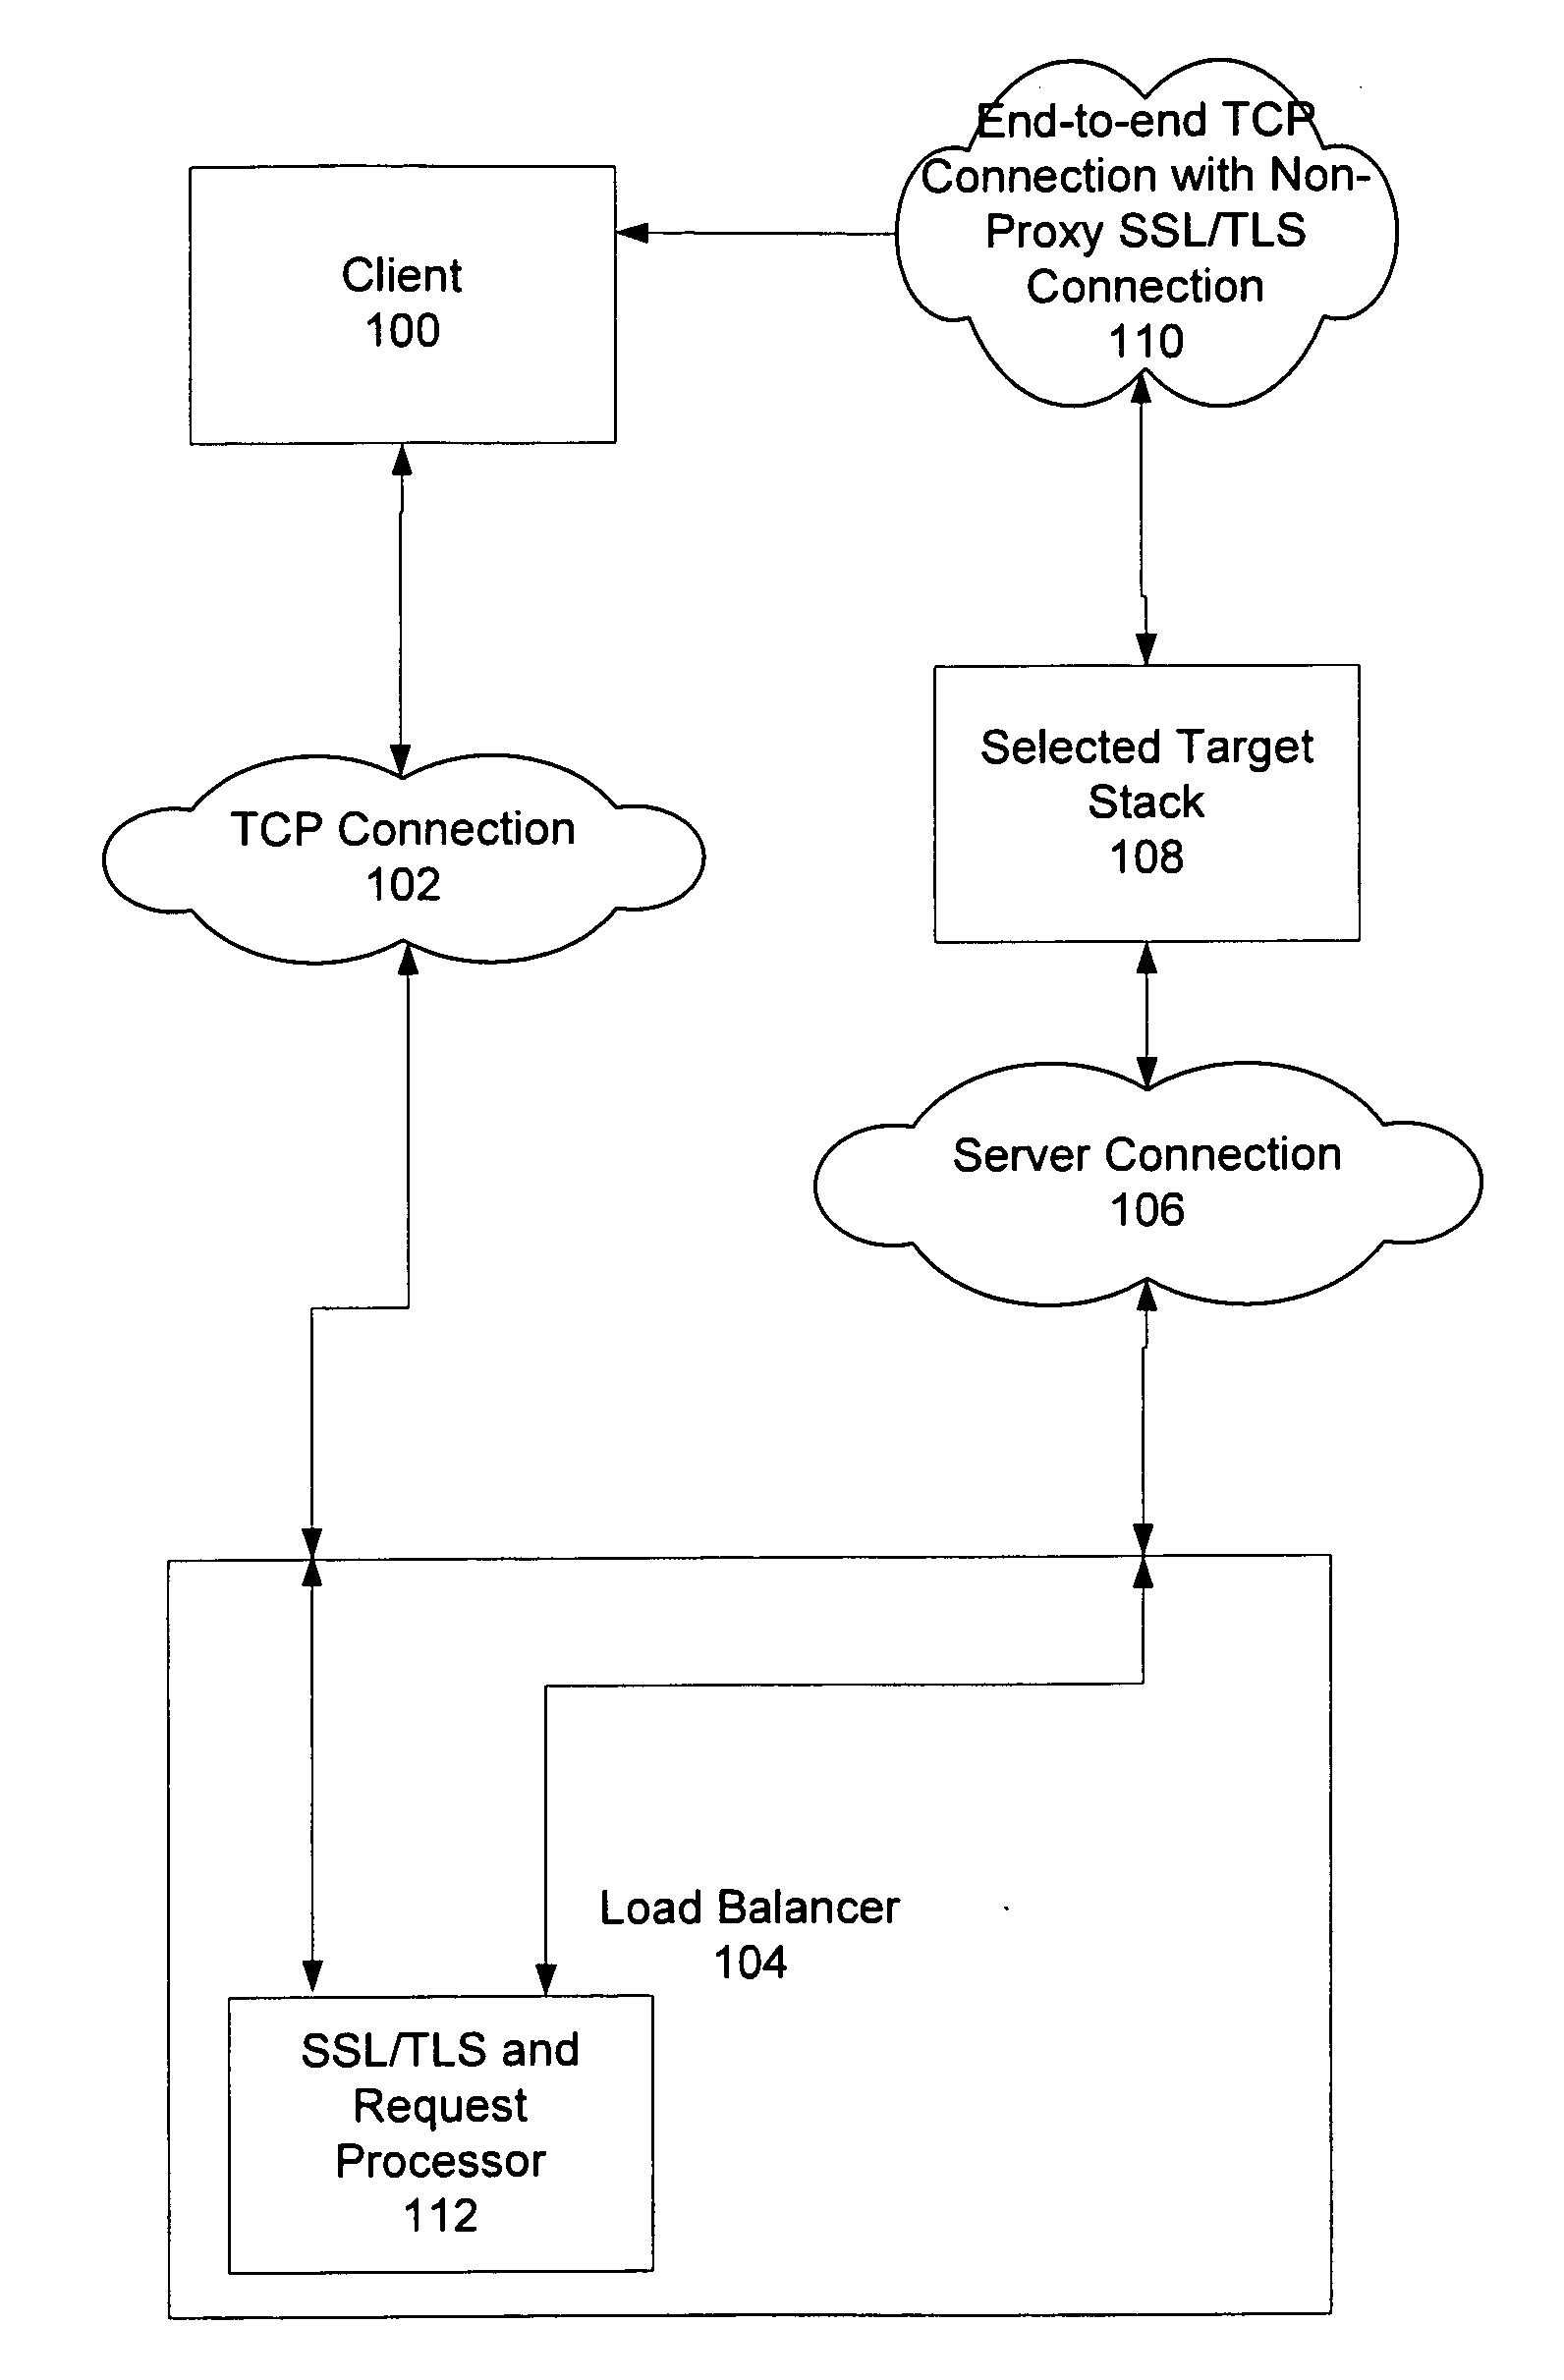 Method and system for providing non-proxy tls/ssl support in a content-based load balancer